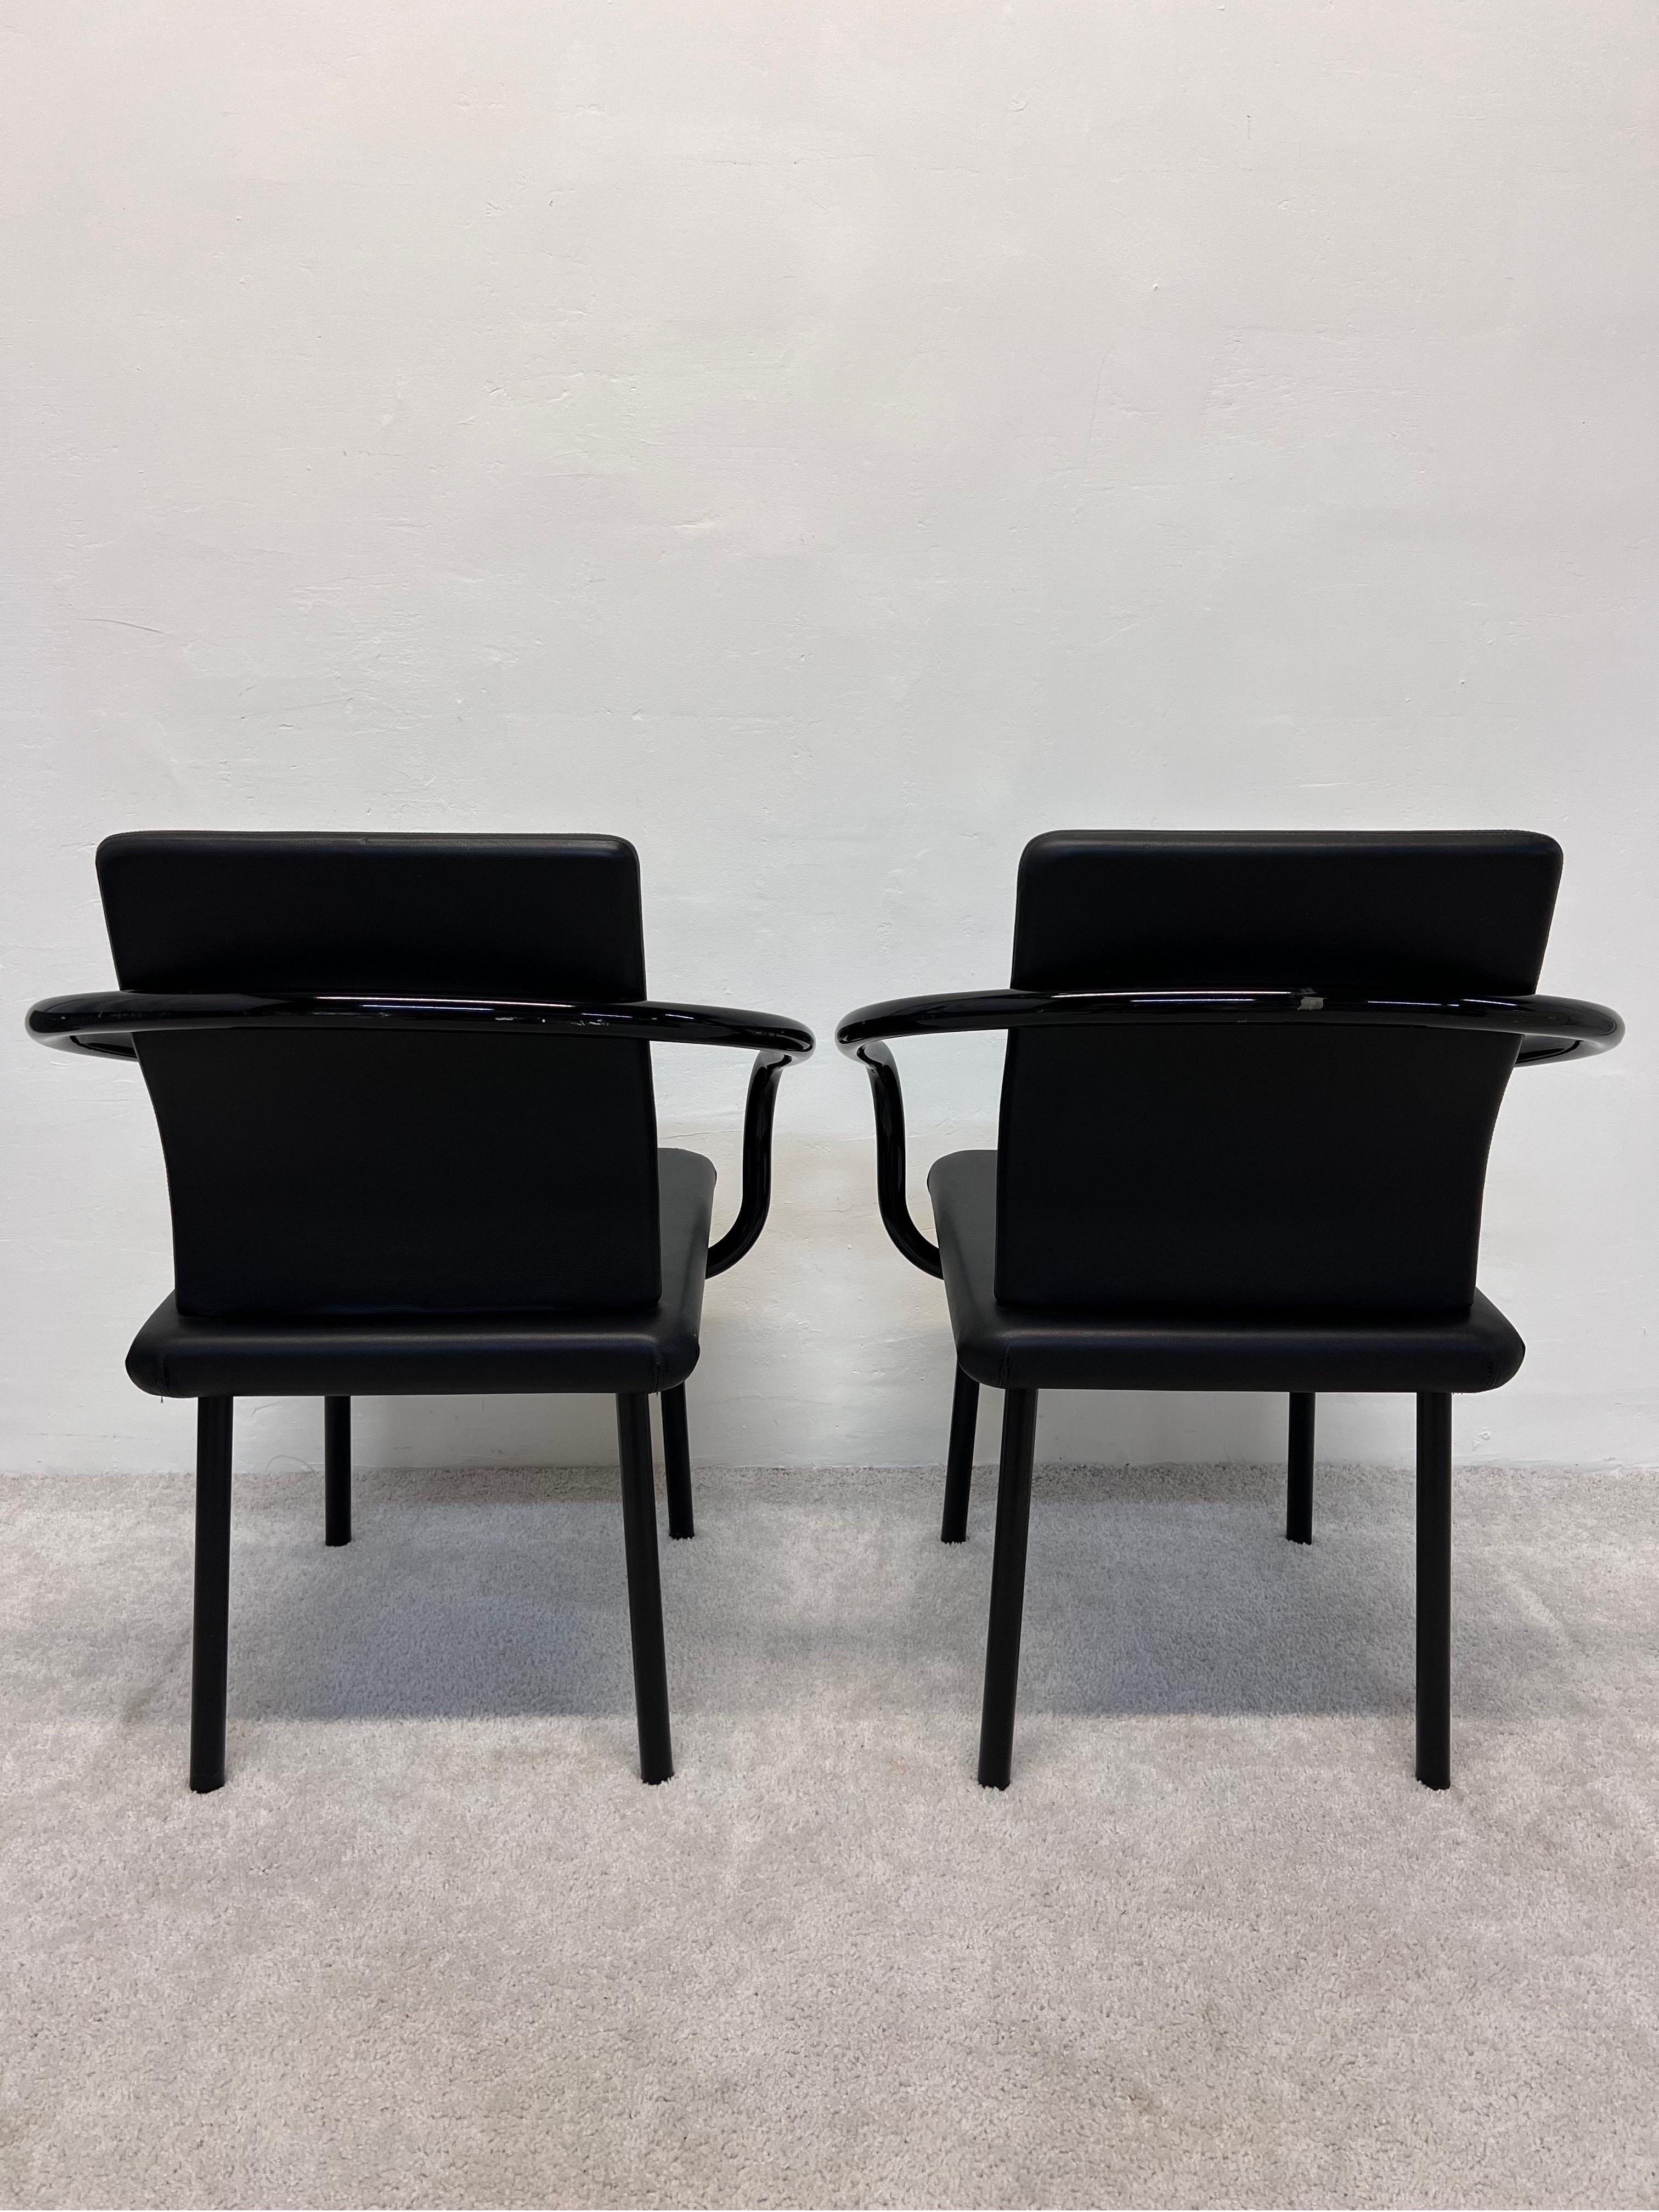 Post-Modern Ettore Sottsass “Mandarin” Black Eco Leather Dining Chairs for Knoll, a Pair For Sale